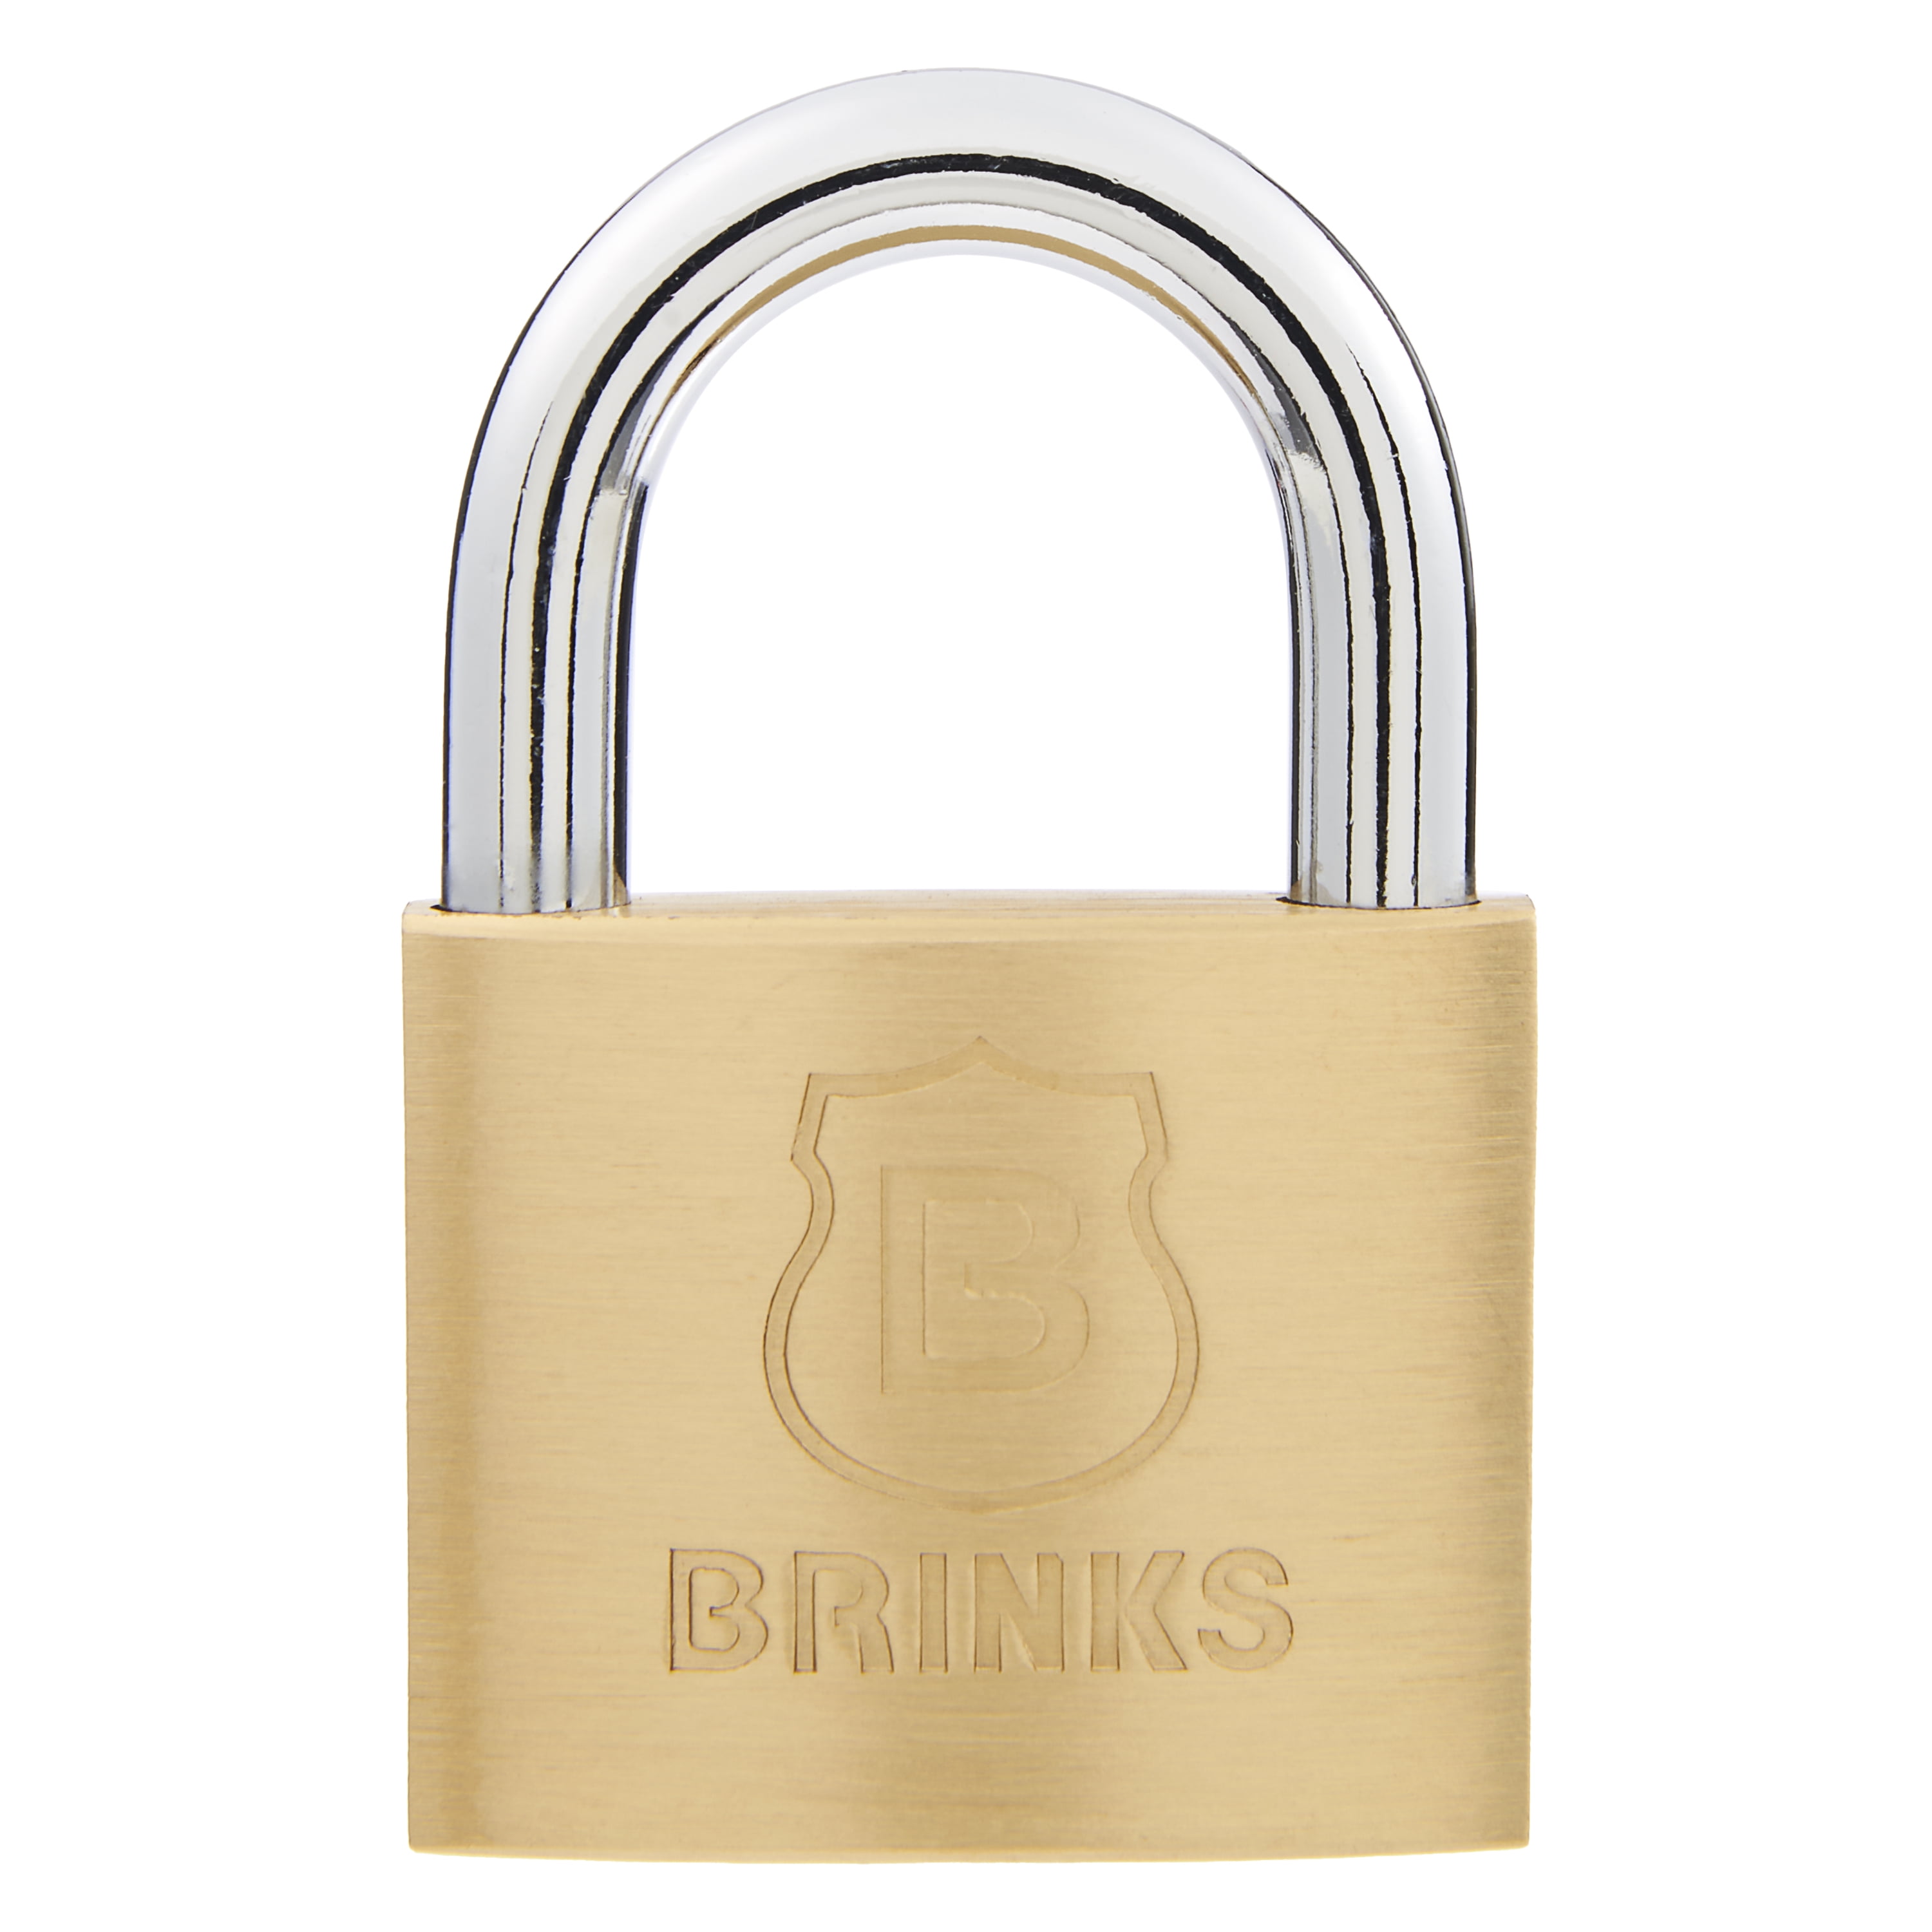 Fortress Padlock by Master Lock Hardened Steel High Security 2pk for sale online 